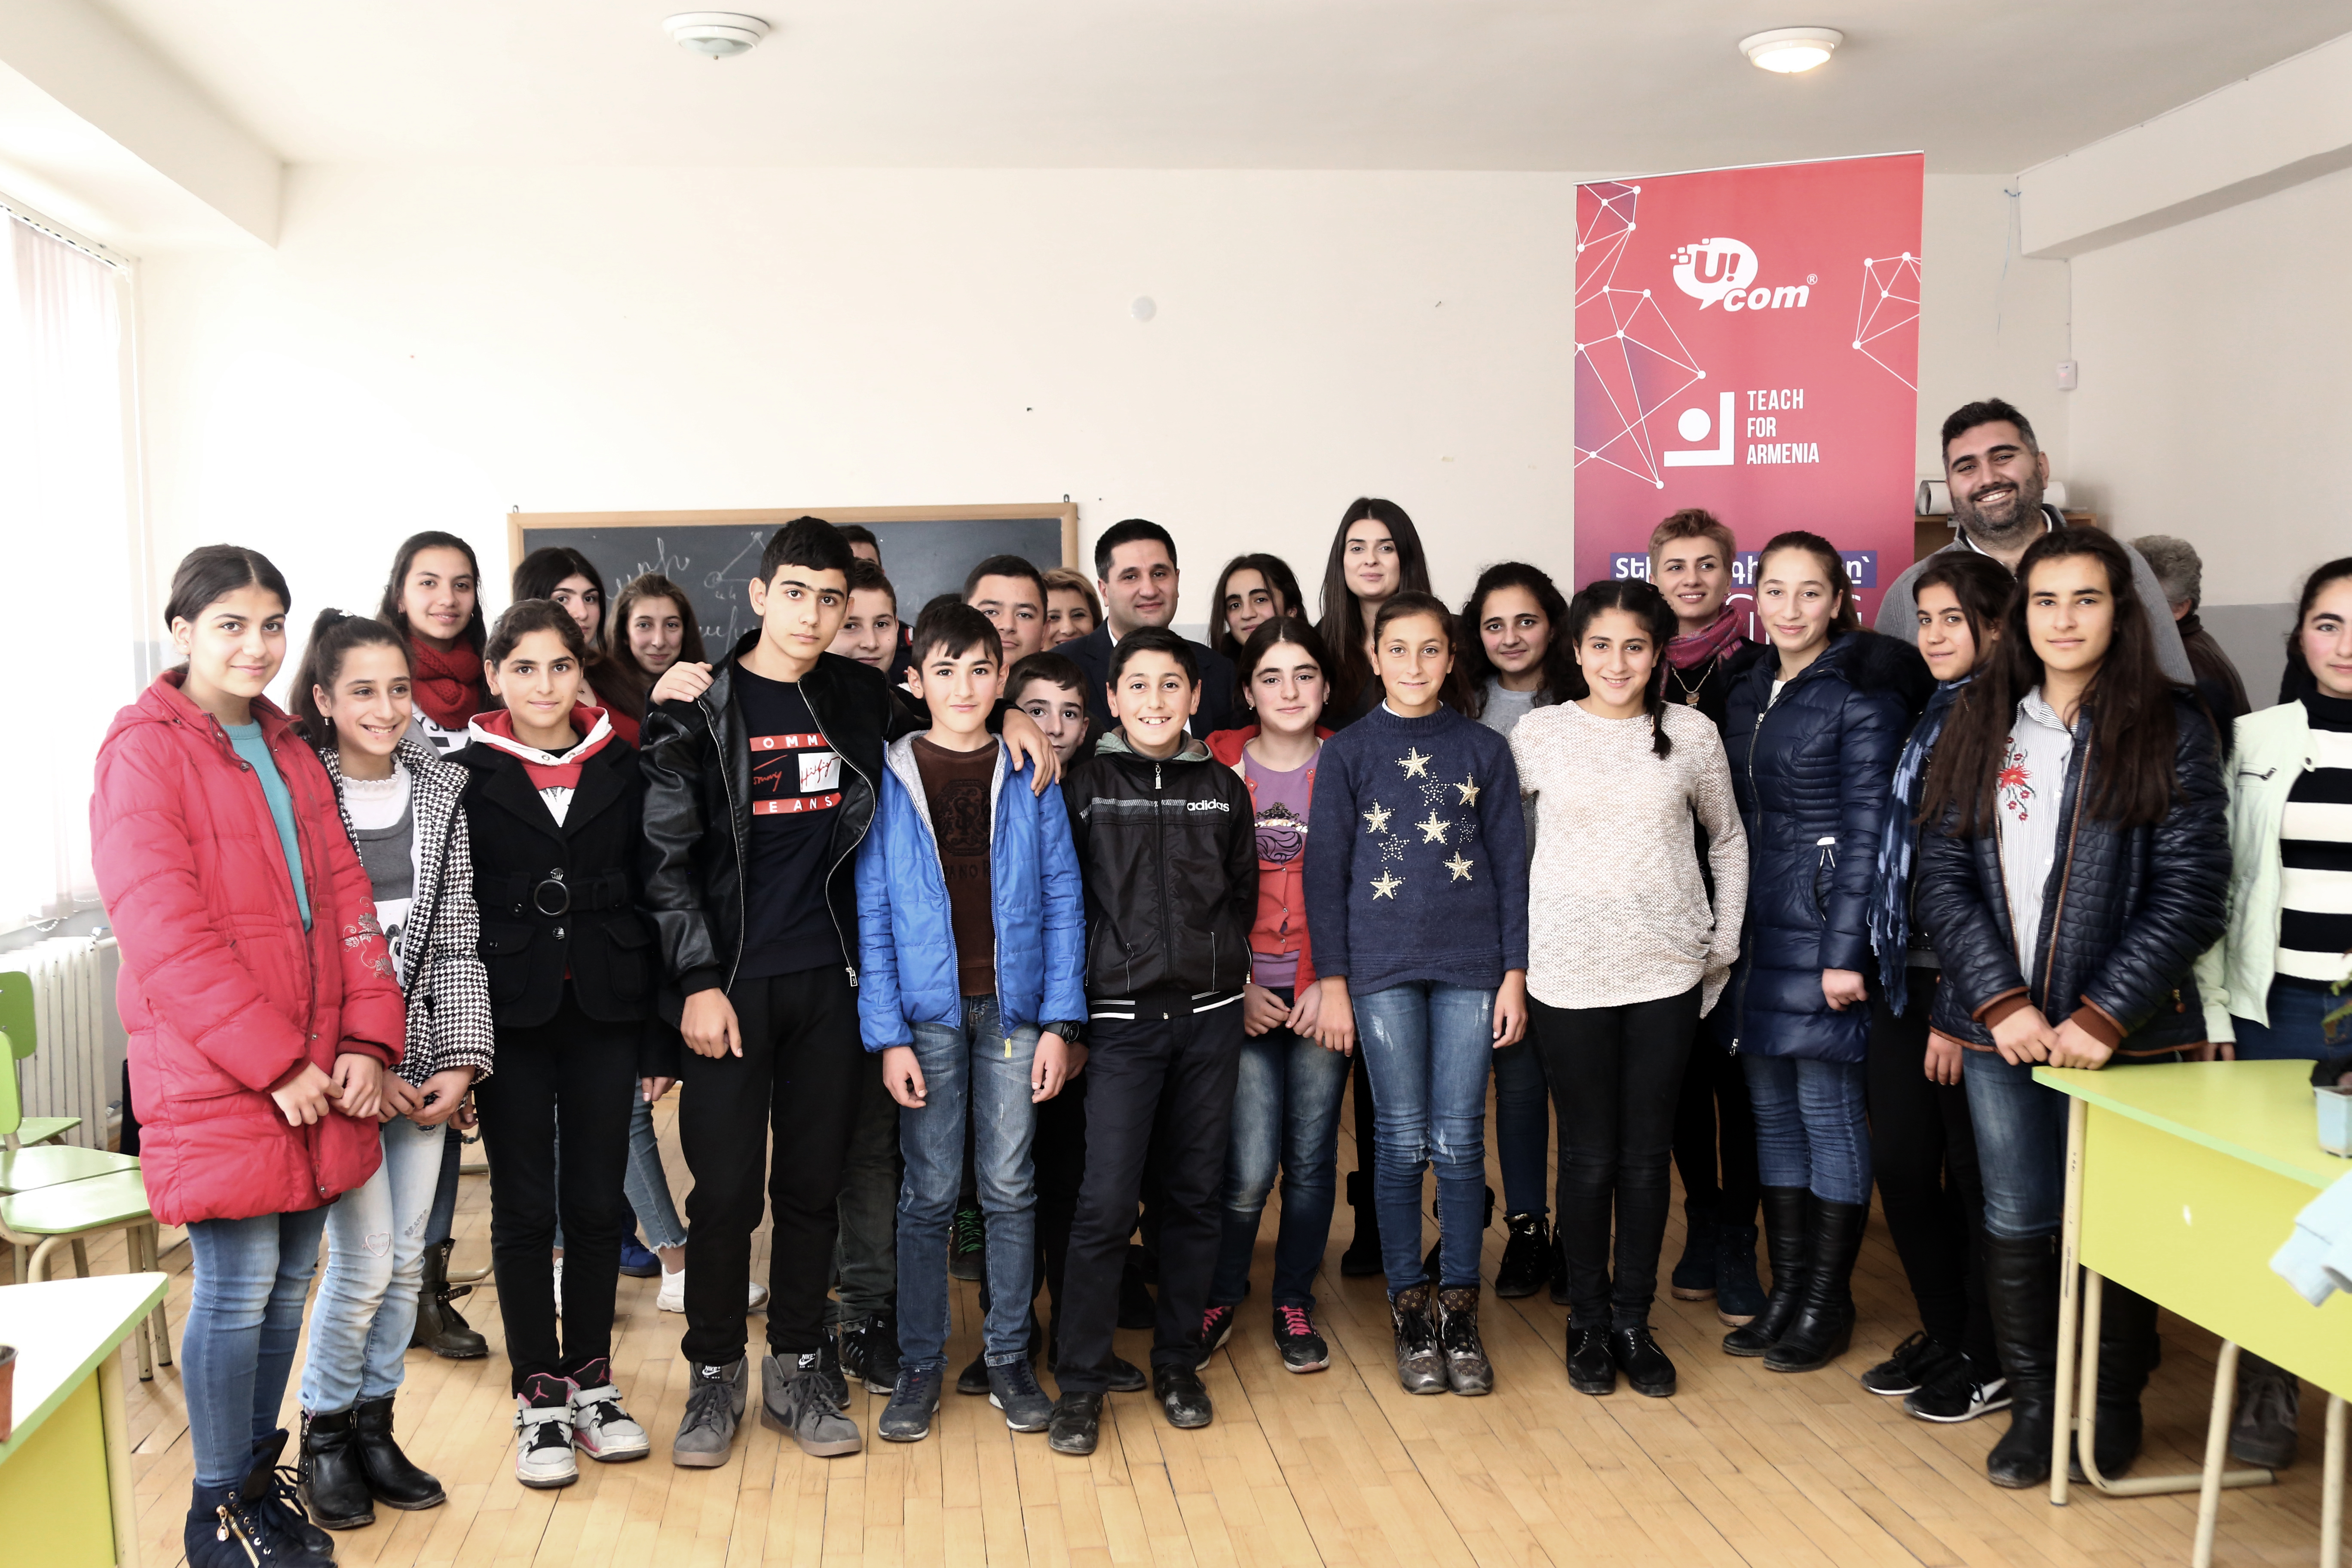 Ucom’s Co-Founder and Director General Conducted an Open Lecture for “Armath” Lab and “Teach for Armenia” Students in Kosh